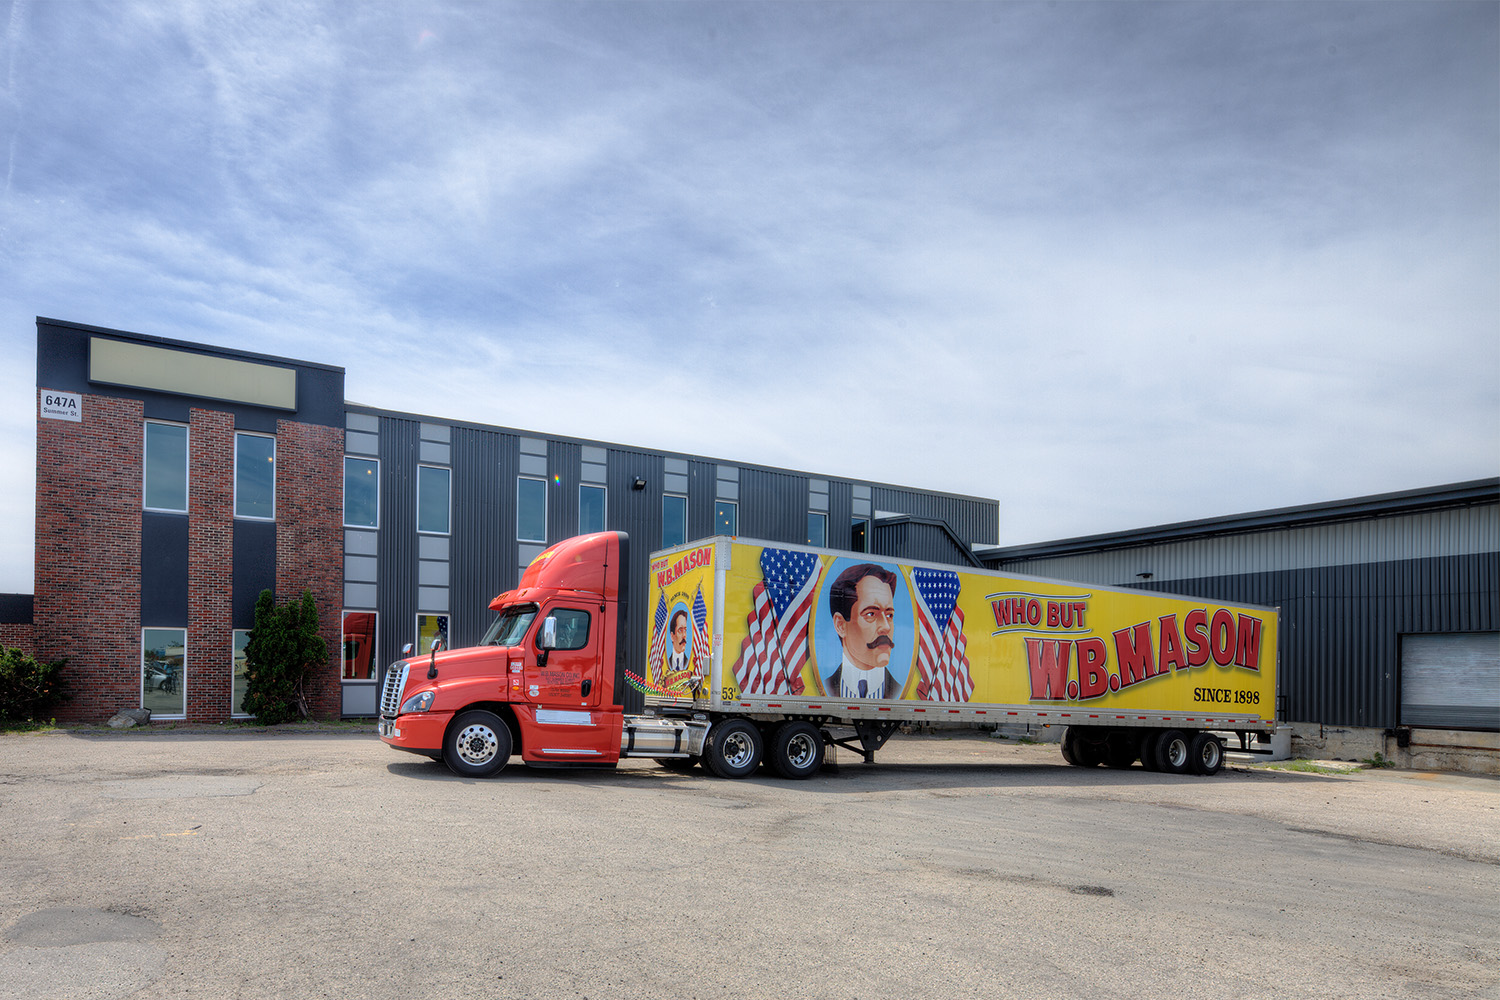 W.B. Mason truck parked outside of building 